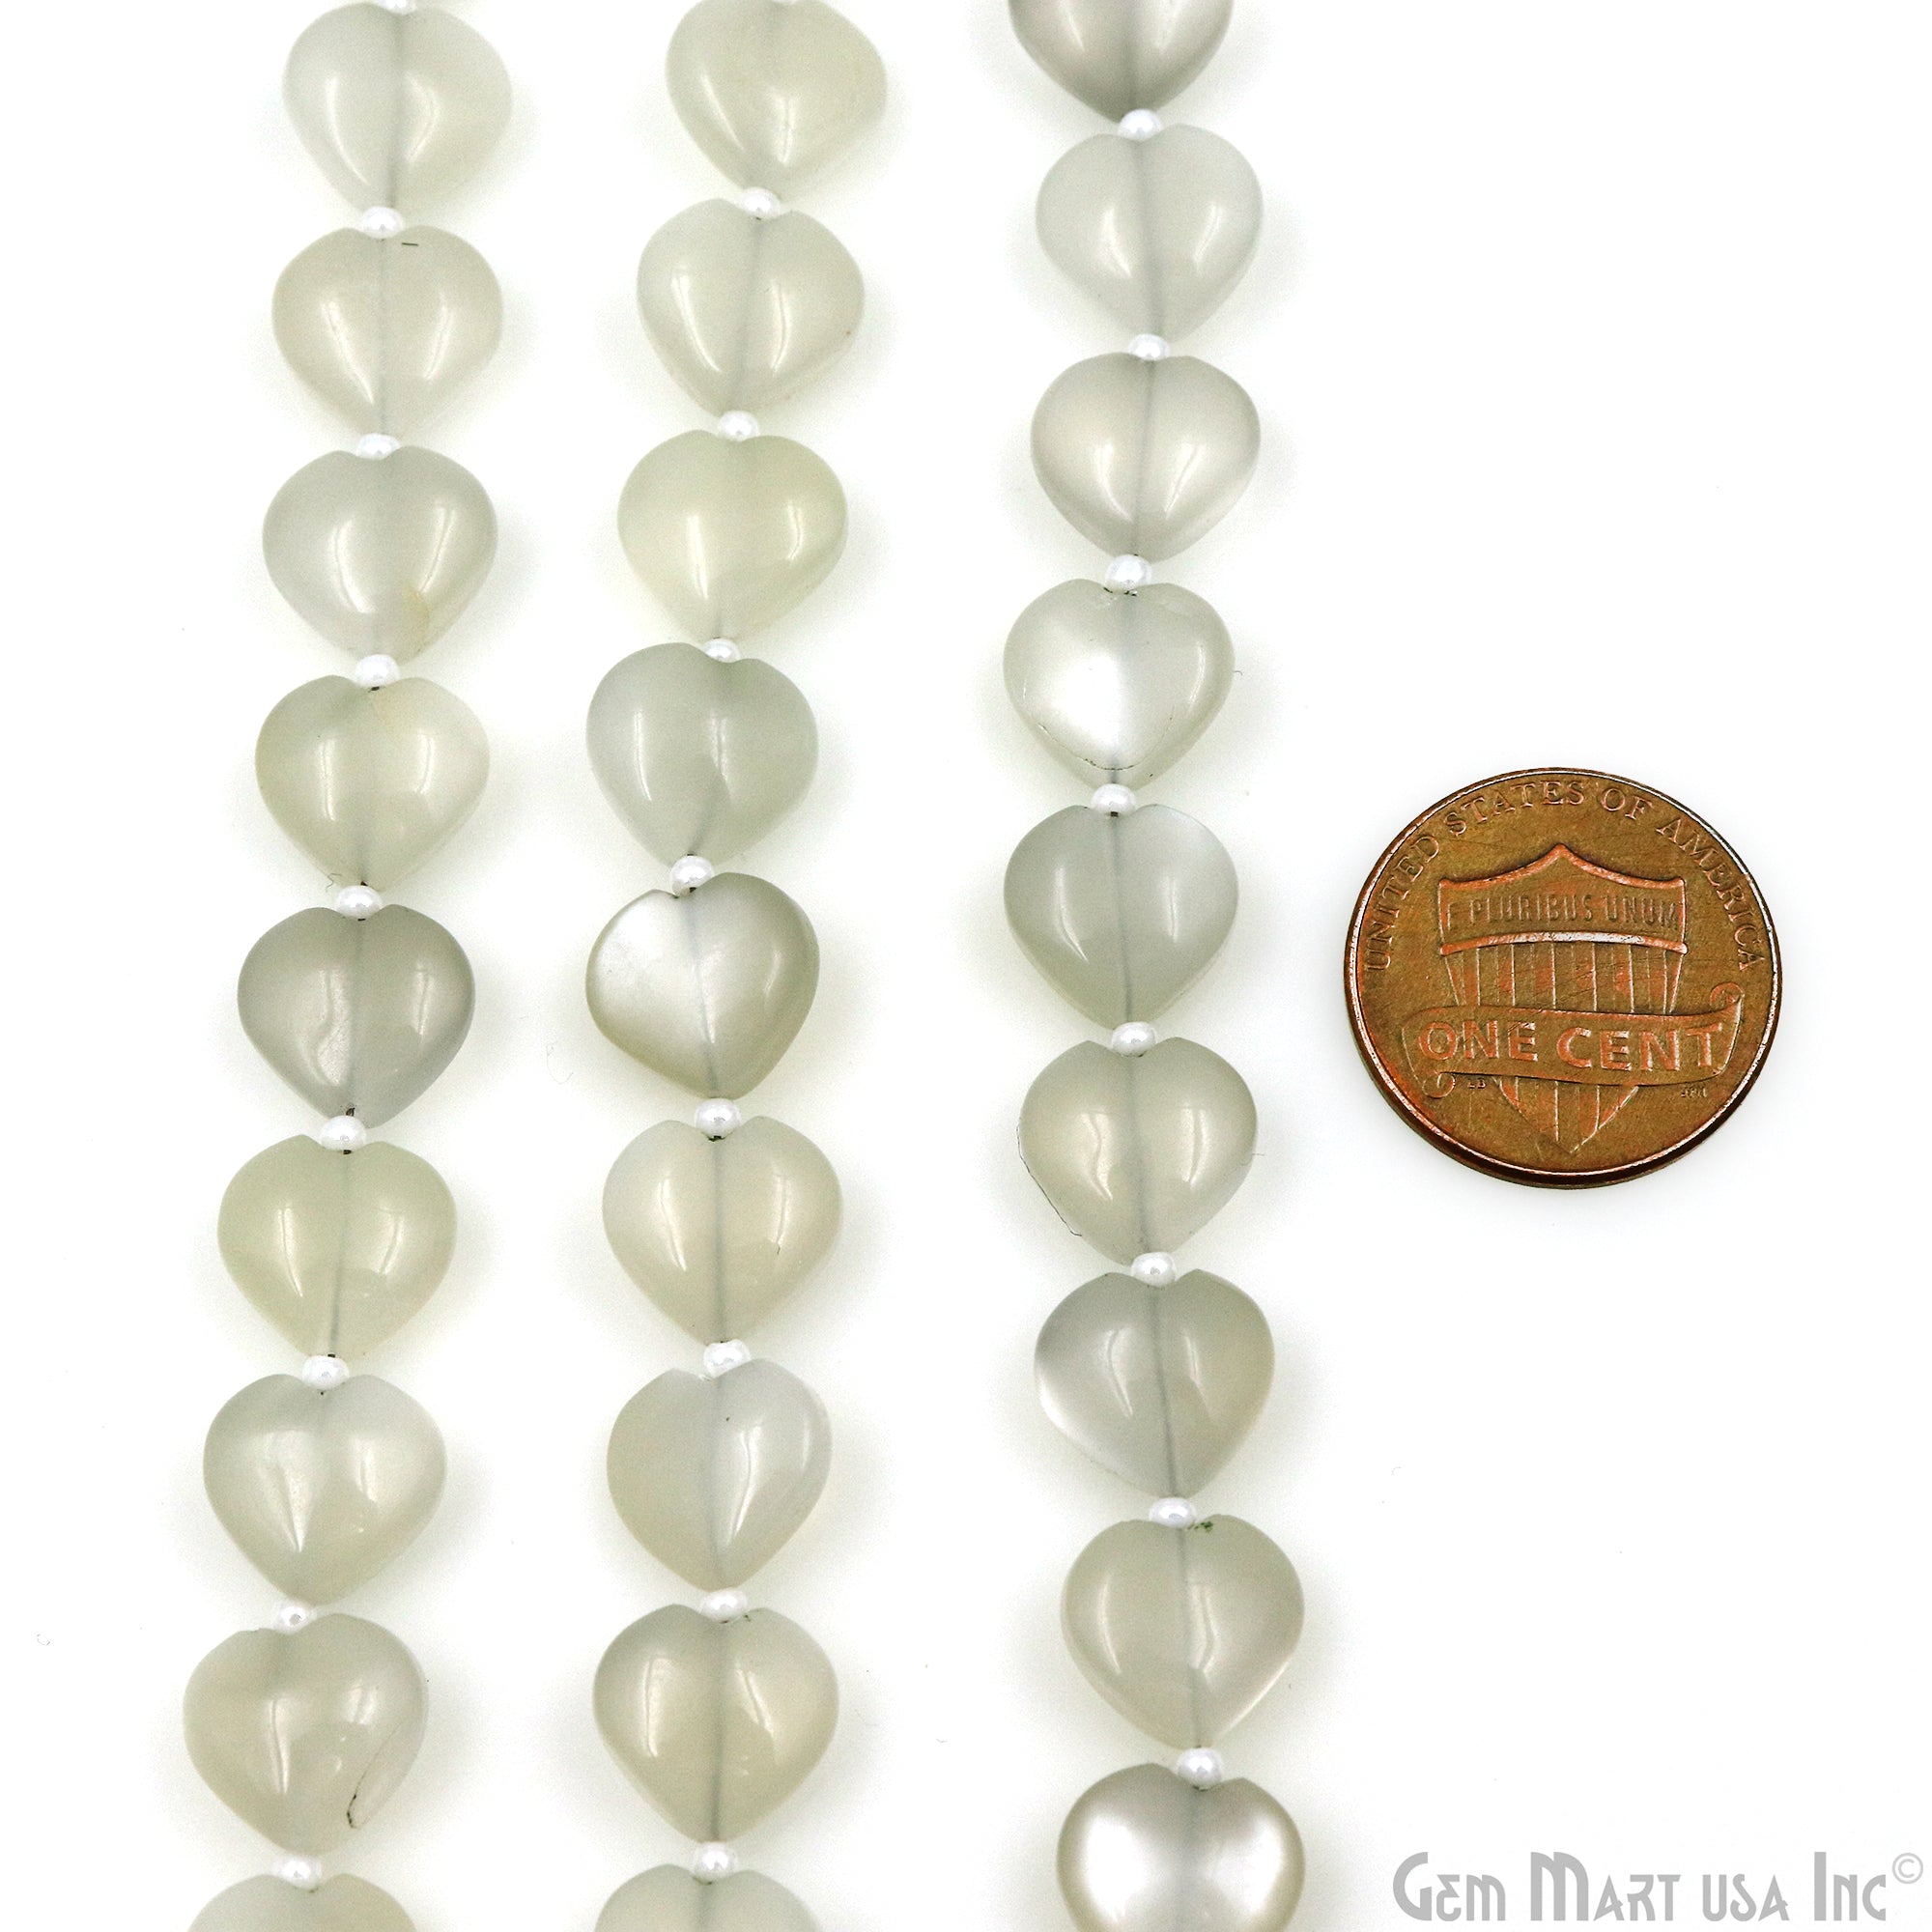 White Chalcedony Heart Shape Cabochon Beads 10mm Gemstone 7 Inch Strands Briolette Drops